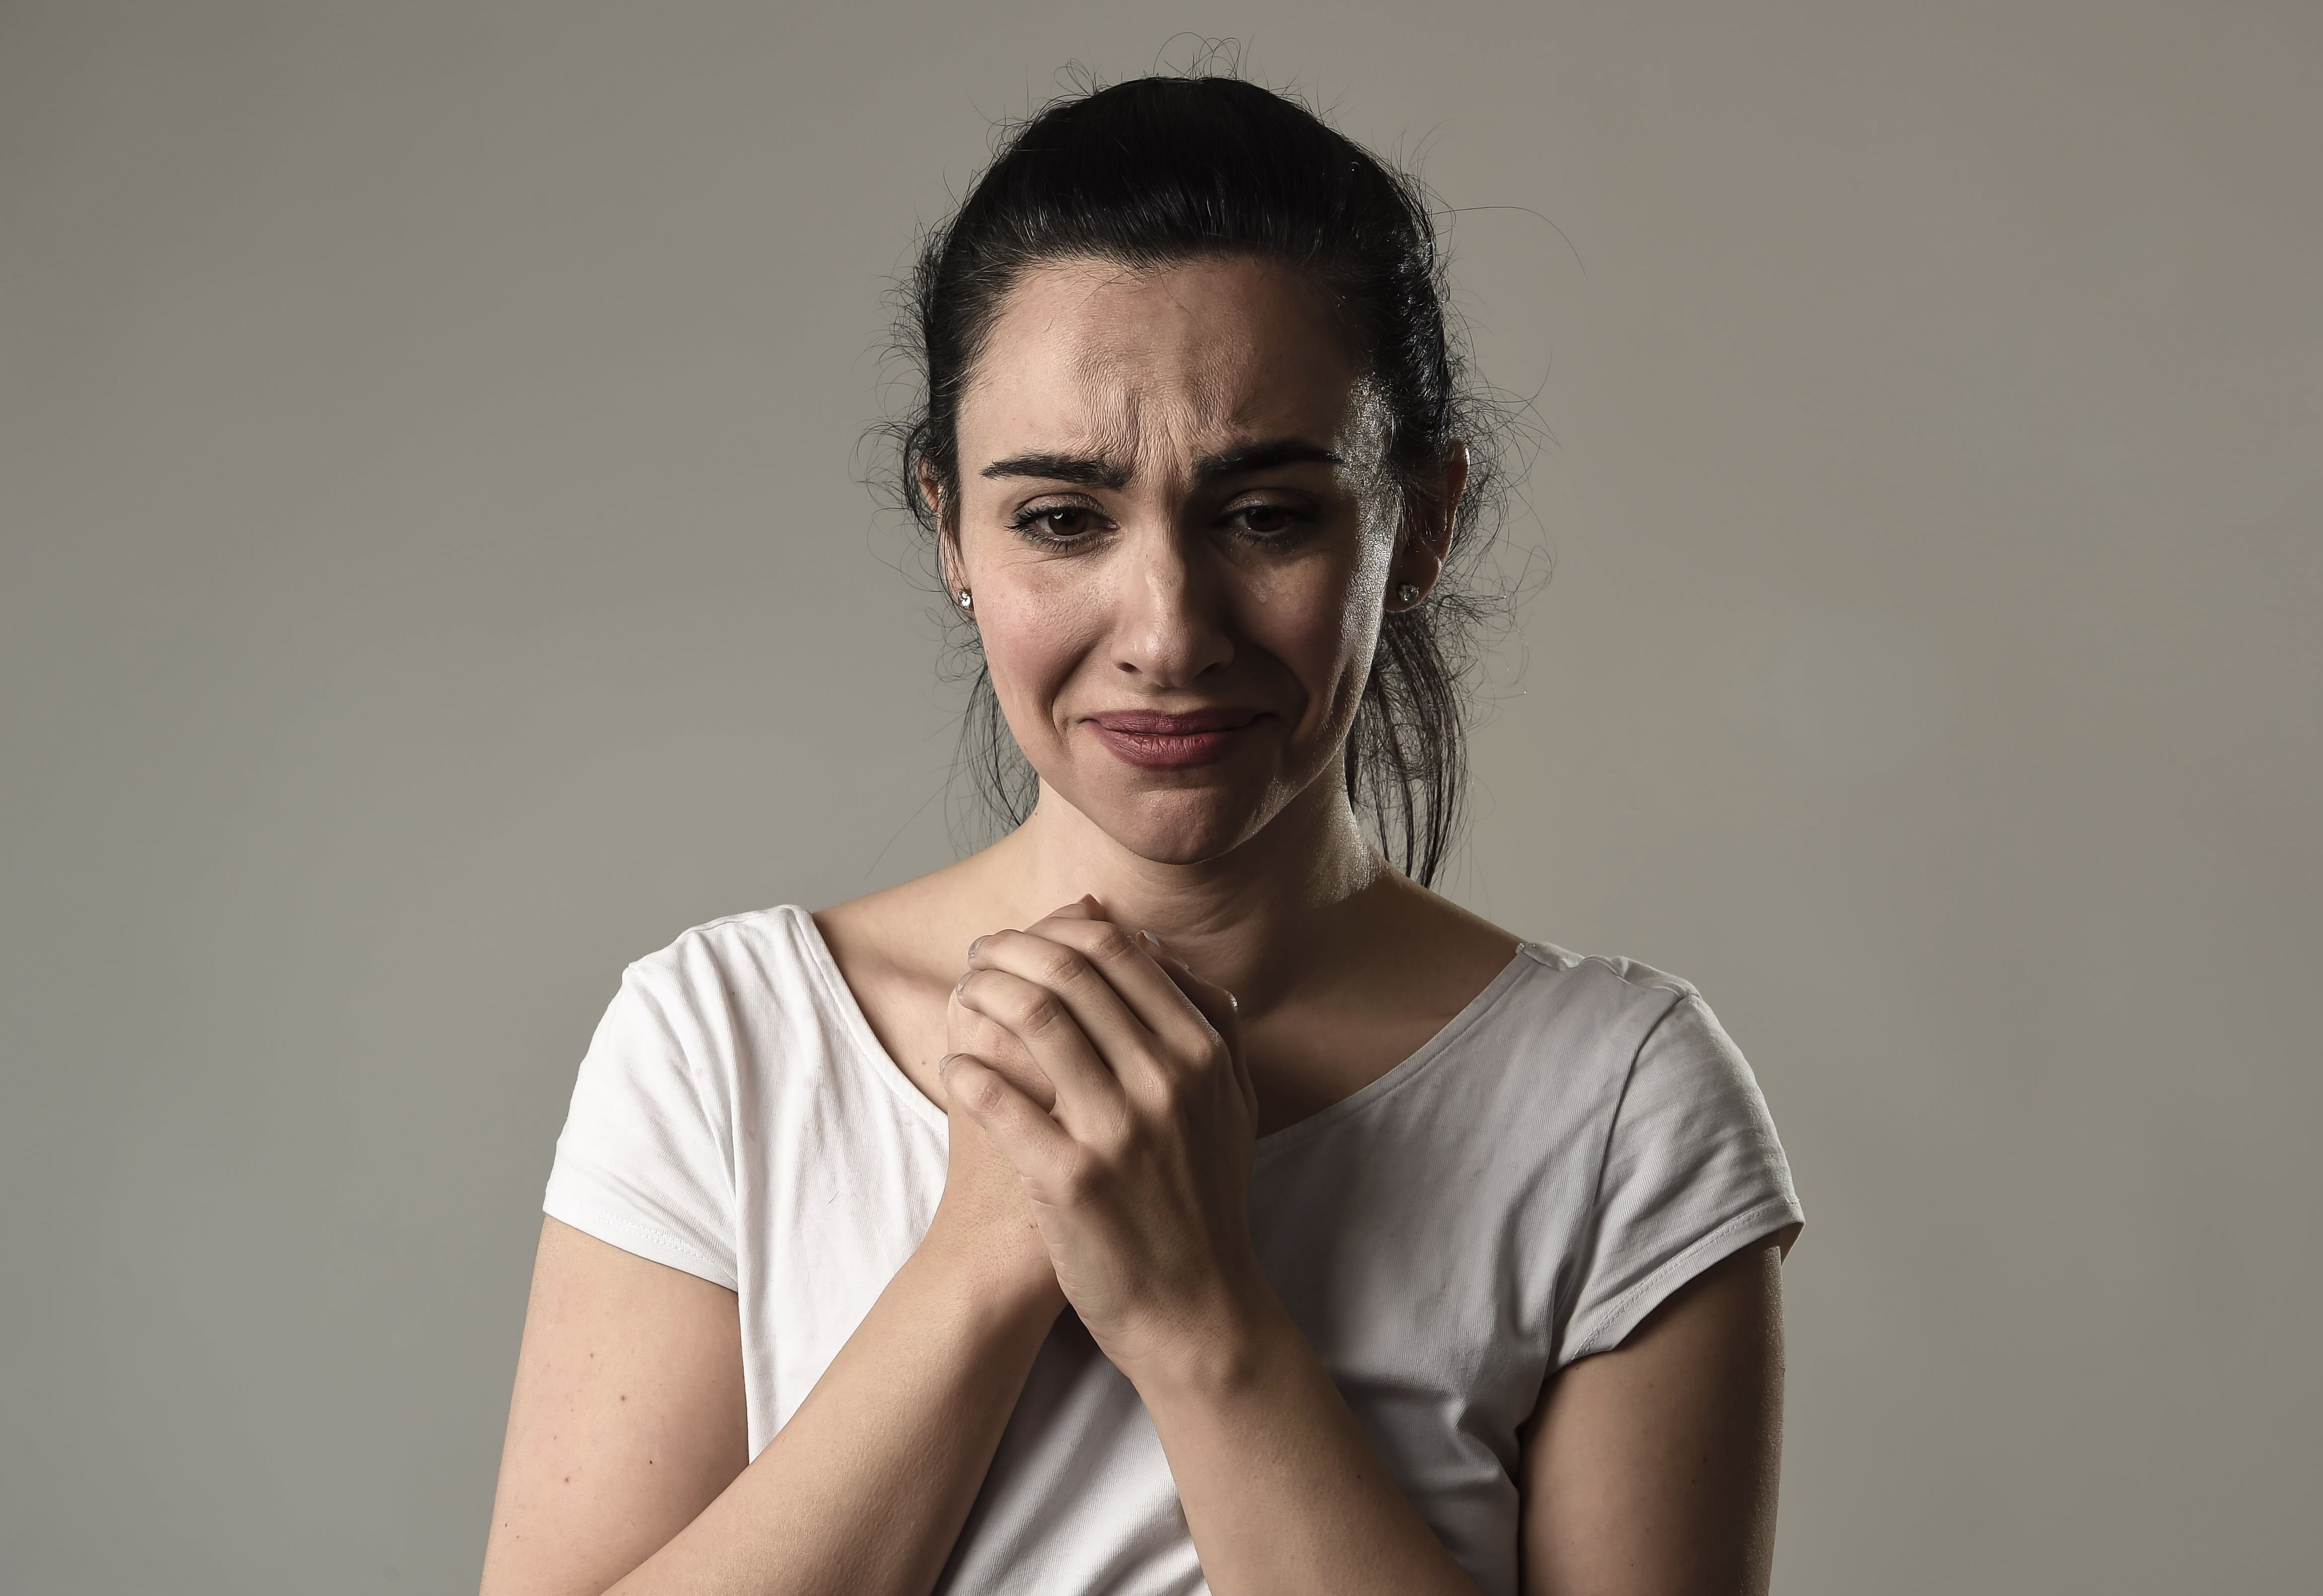 A woman crying while her hands are clasped together. | Source: Shutterstock